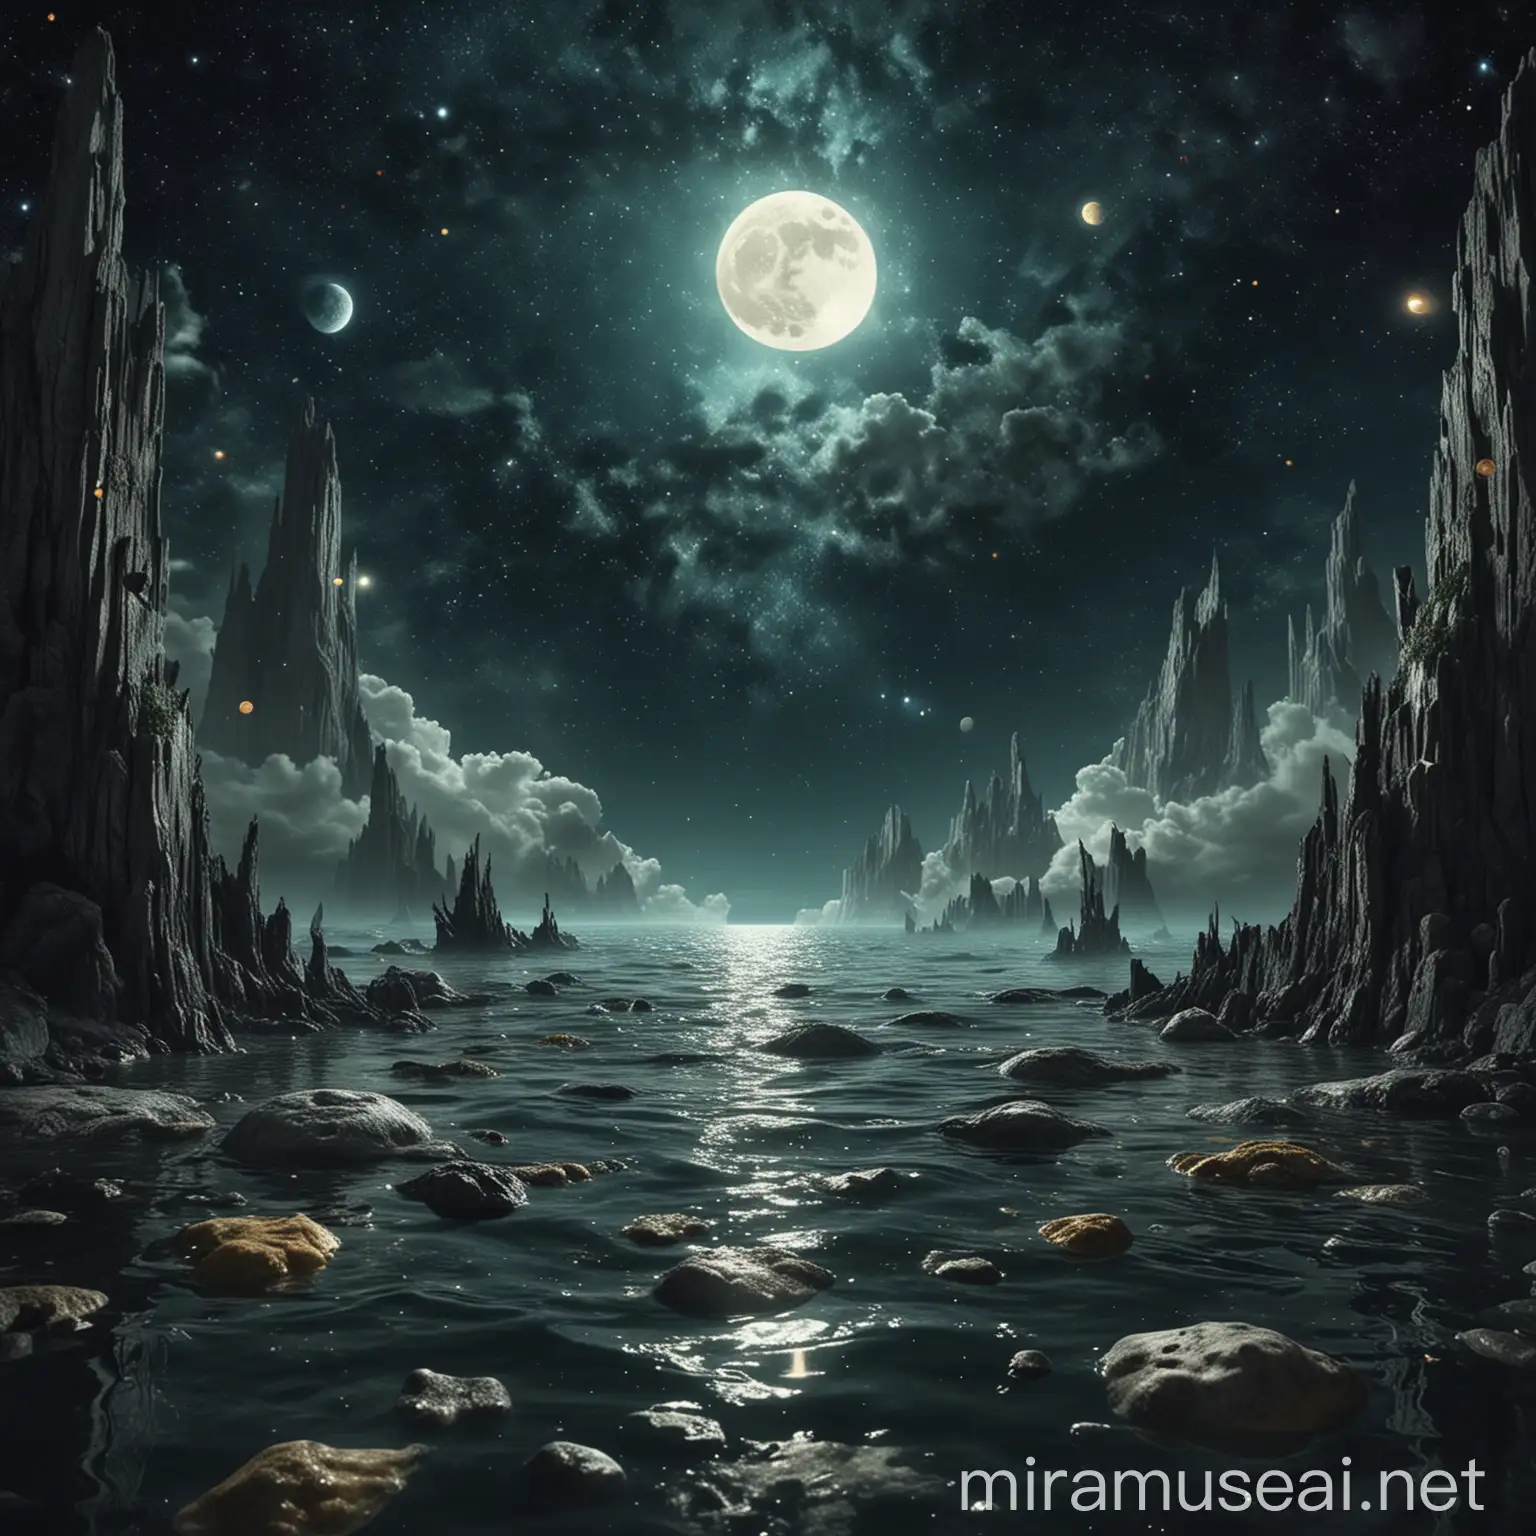 Create a surreal image elements of the moon, stars, celestial beings, and an aquatic atmosphere.